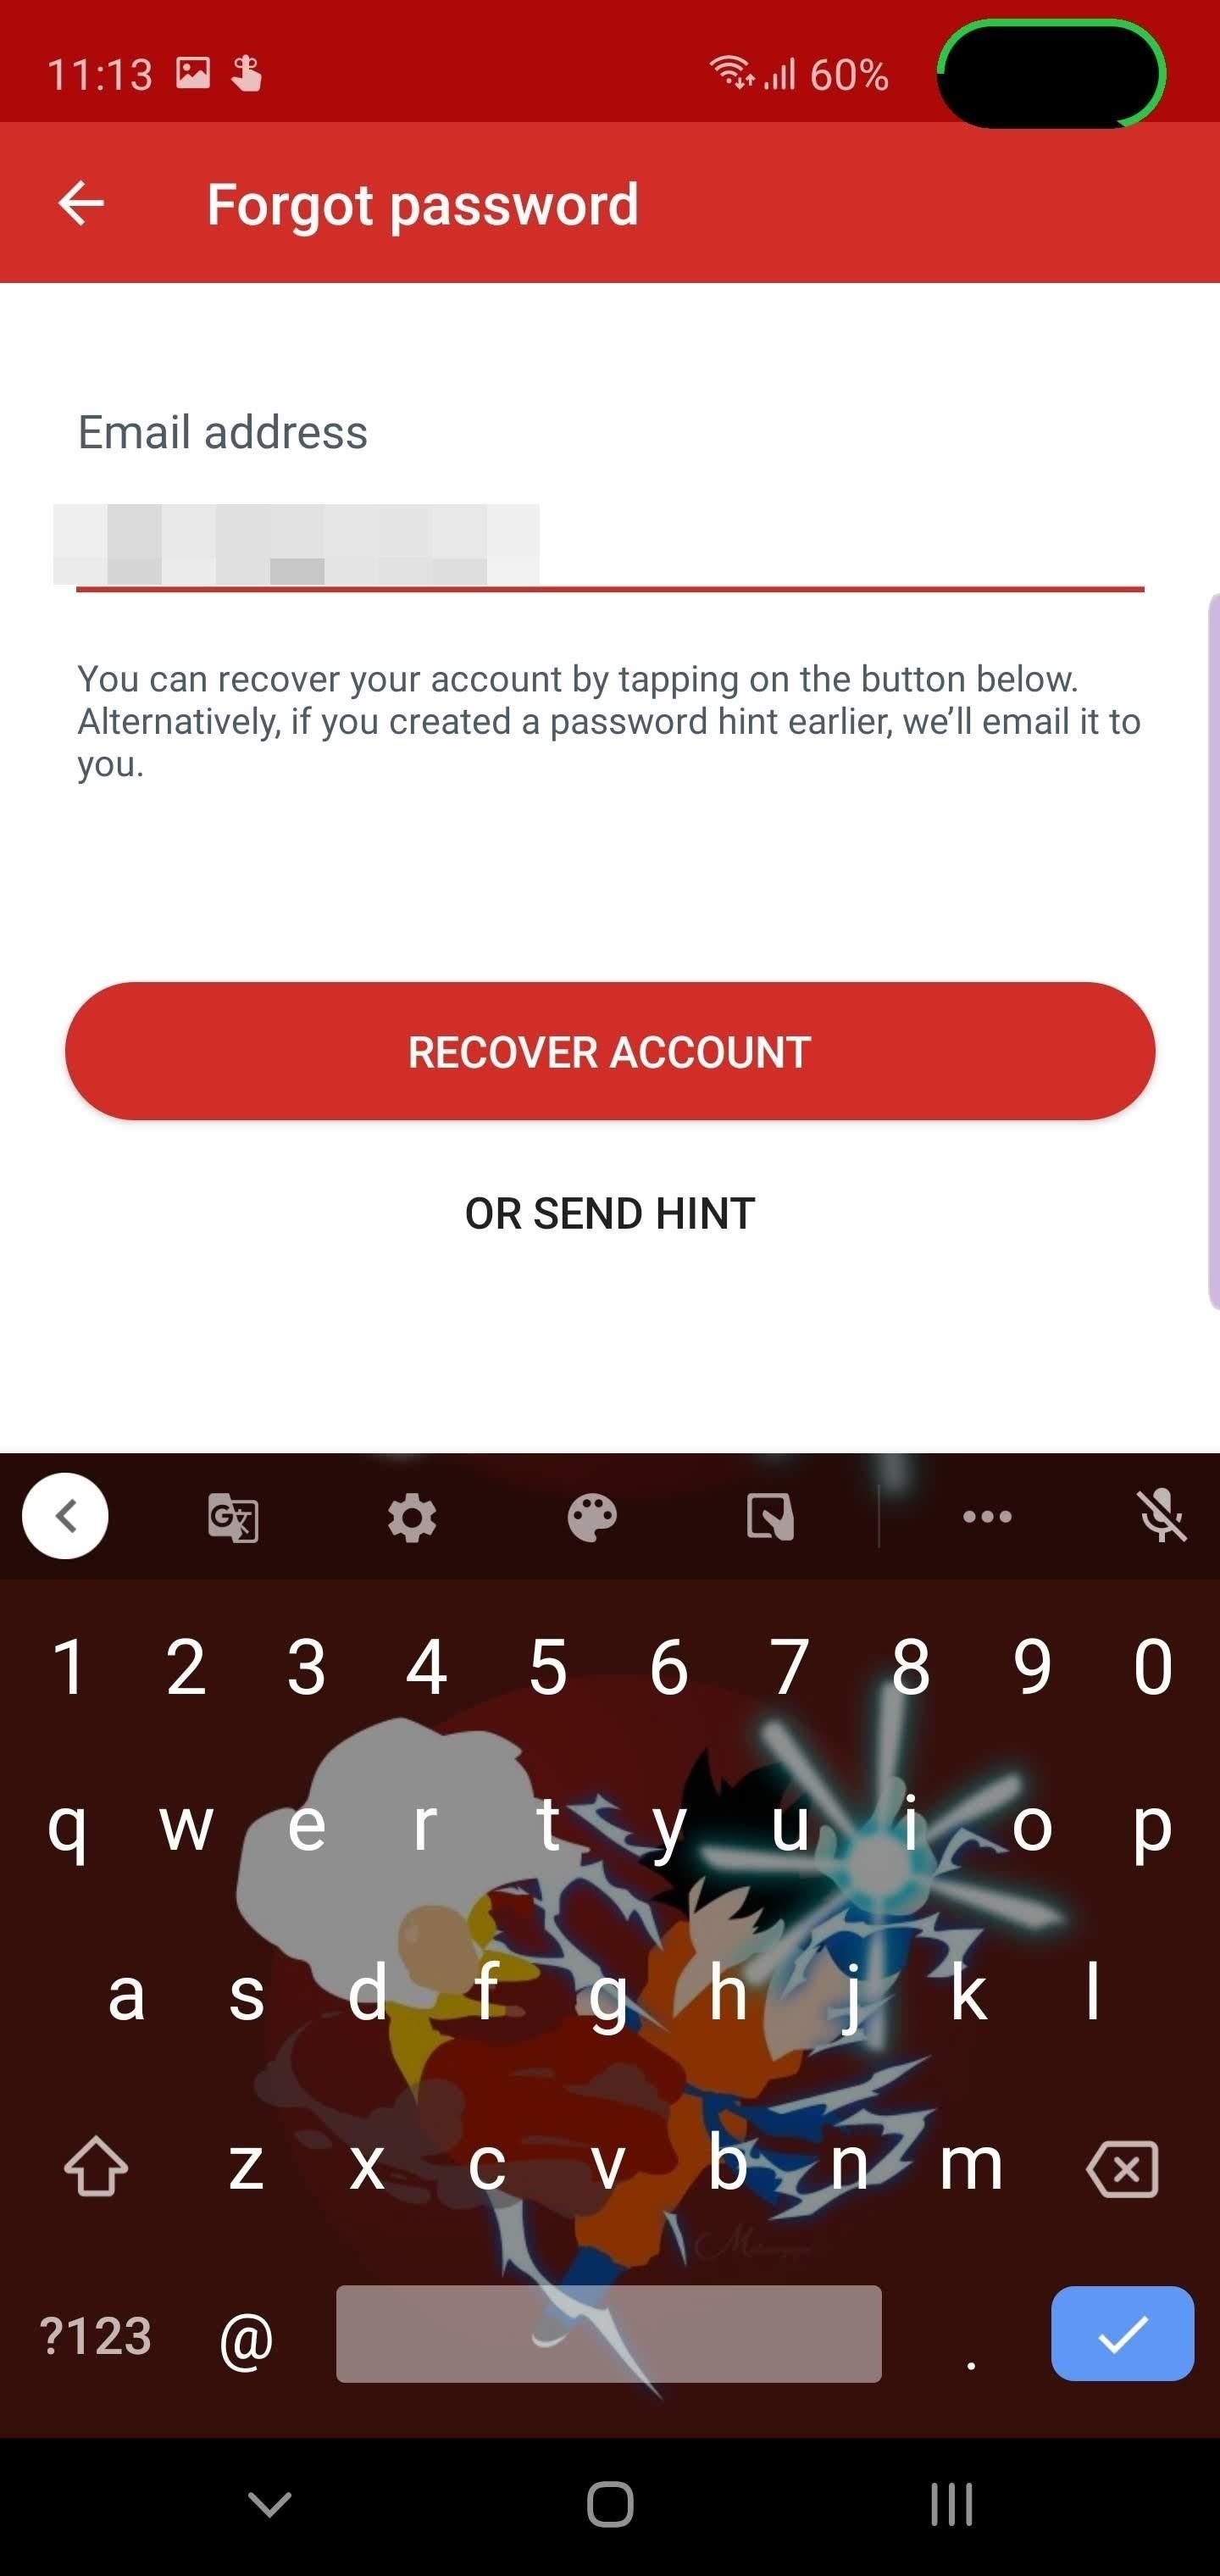 How to Use Biometrics to Change Your LastPass Master Password from Your Phone